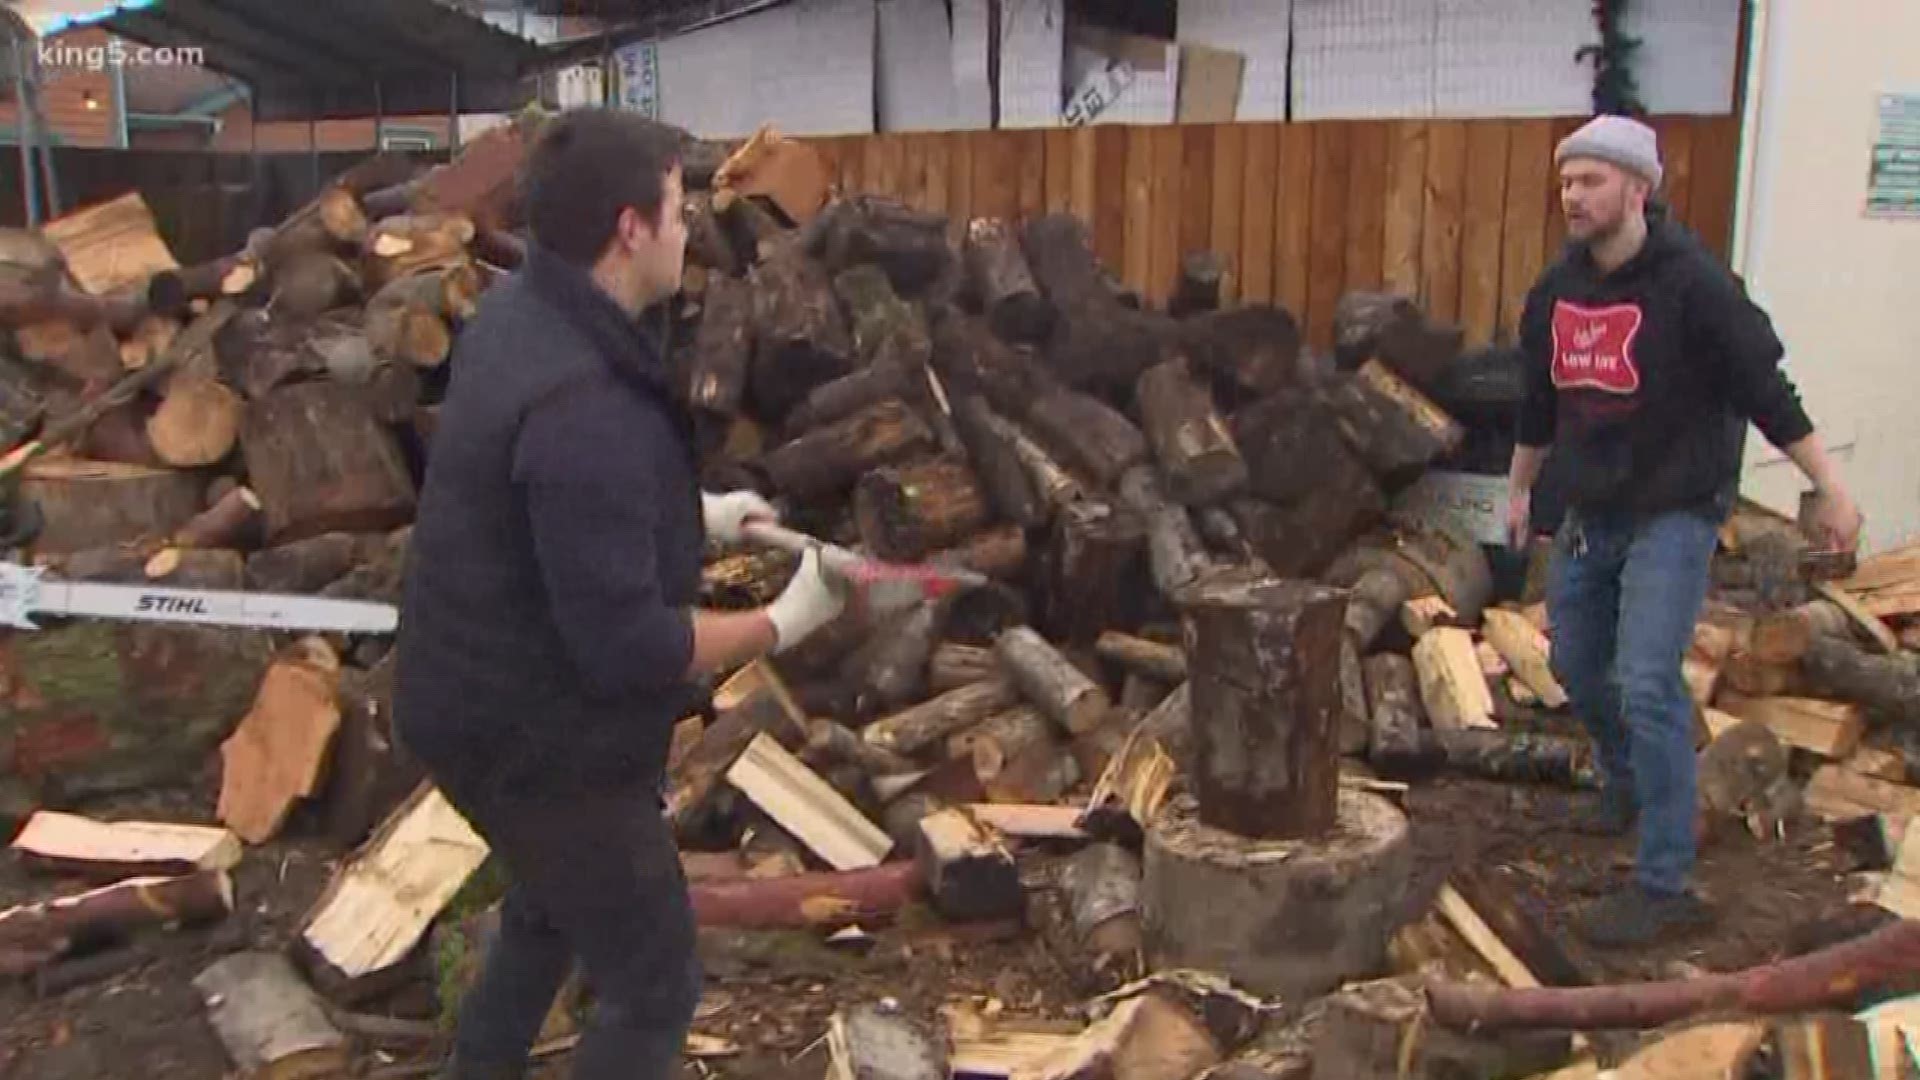 A Lake Stevens family is on mission to bring firewood to those who need it most. KING 5's Vanessa Misciagna reports: